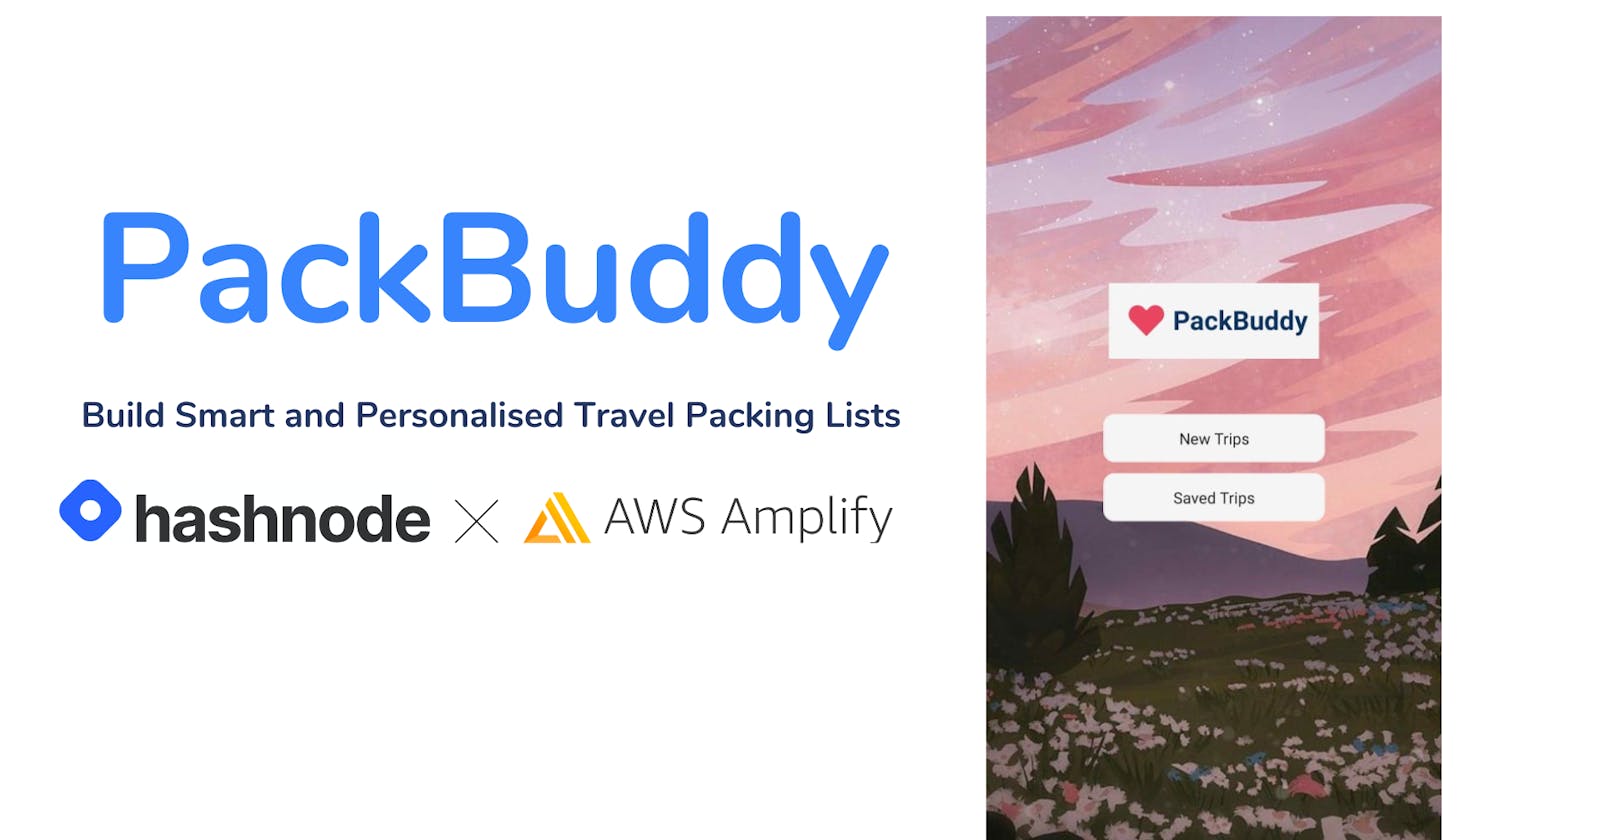 PackBuddy - Build Smart and Personalised Travel Packing Lists